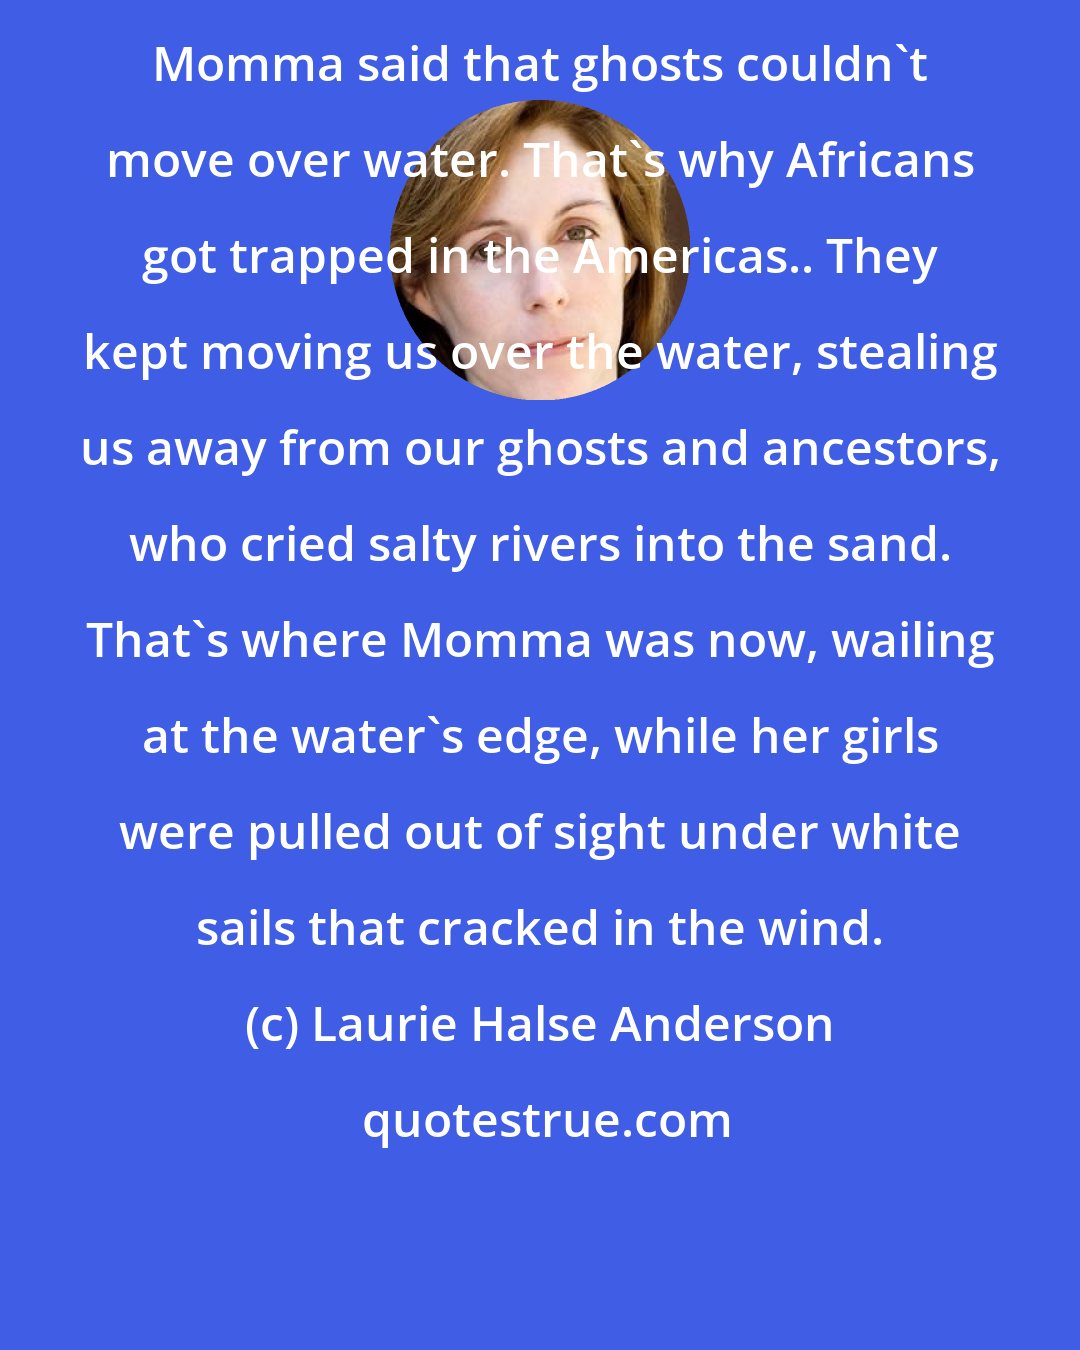 Laurie Halse Anderson: Momma said that ghosts couldn't move over water. That's why Africans got trapped in the Americas.. They kept moving us over the water, stealing us away from our ghosts and ancestors, who cried salty rivers into the sand. That's where Momma was now, wailing at the water's edge, while her girls were pulled out of sight under white sails that cracked in the wind.